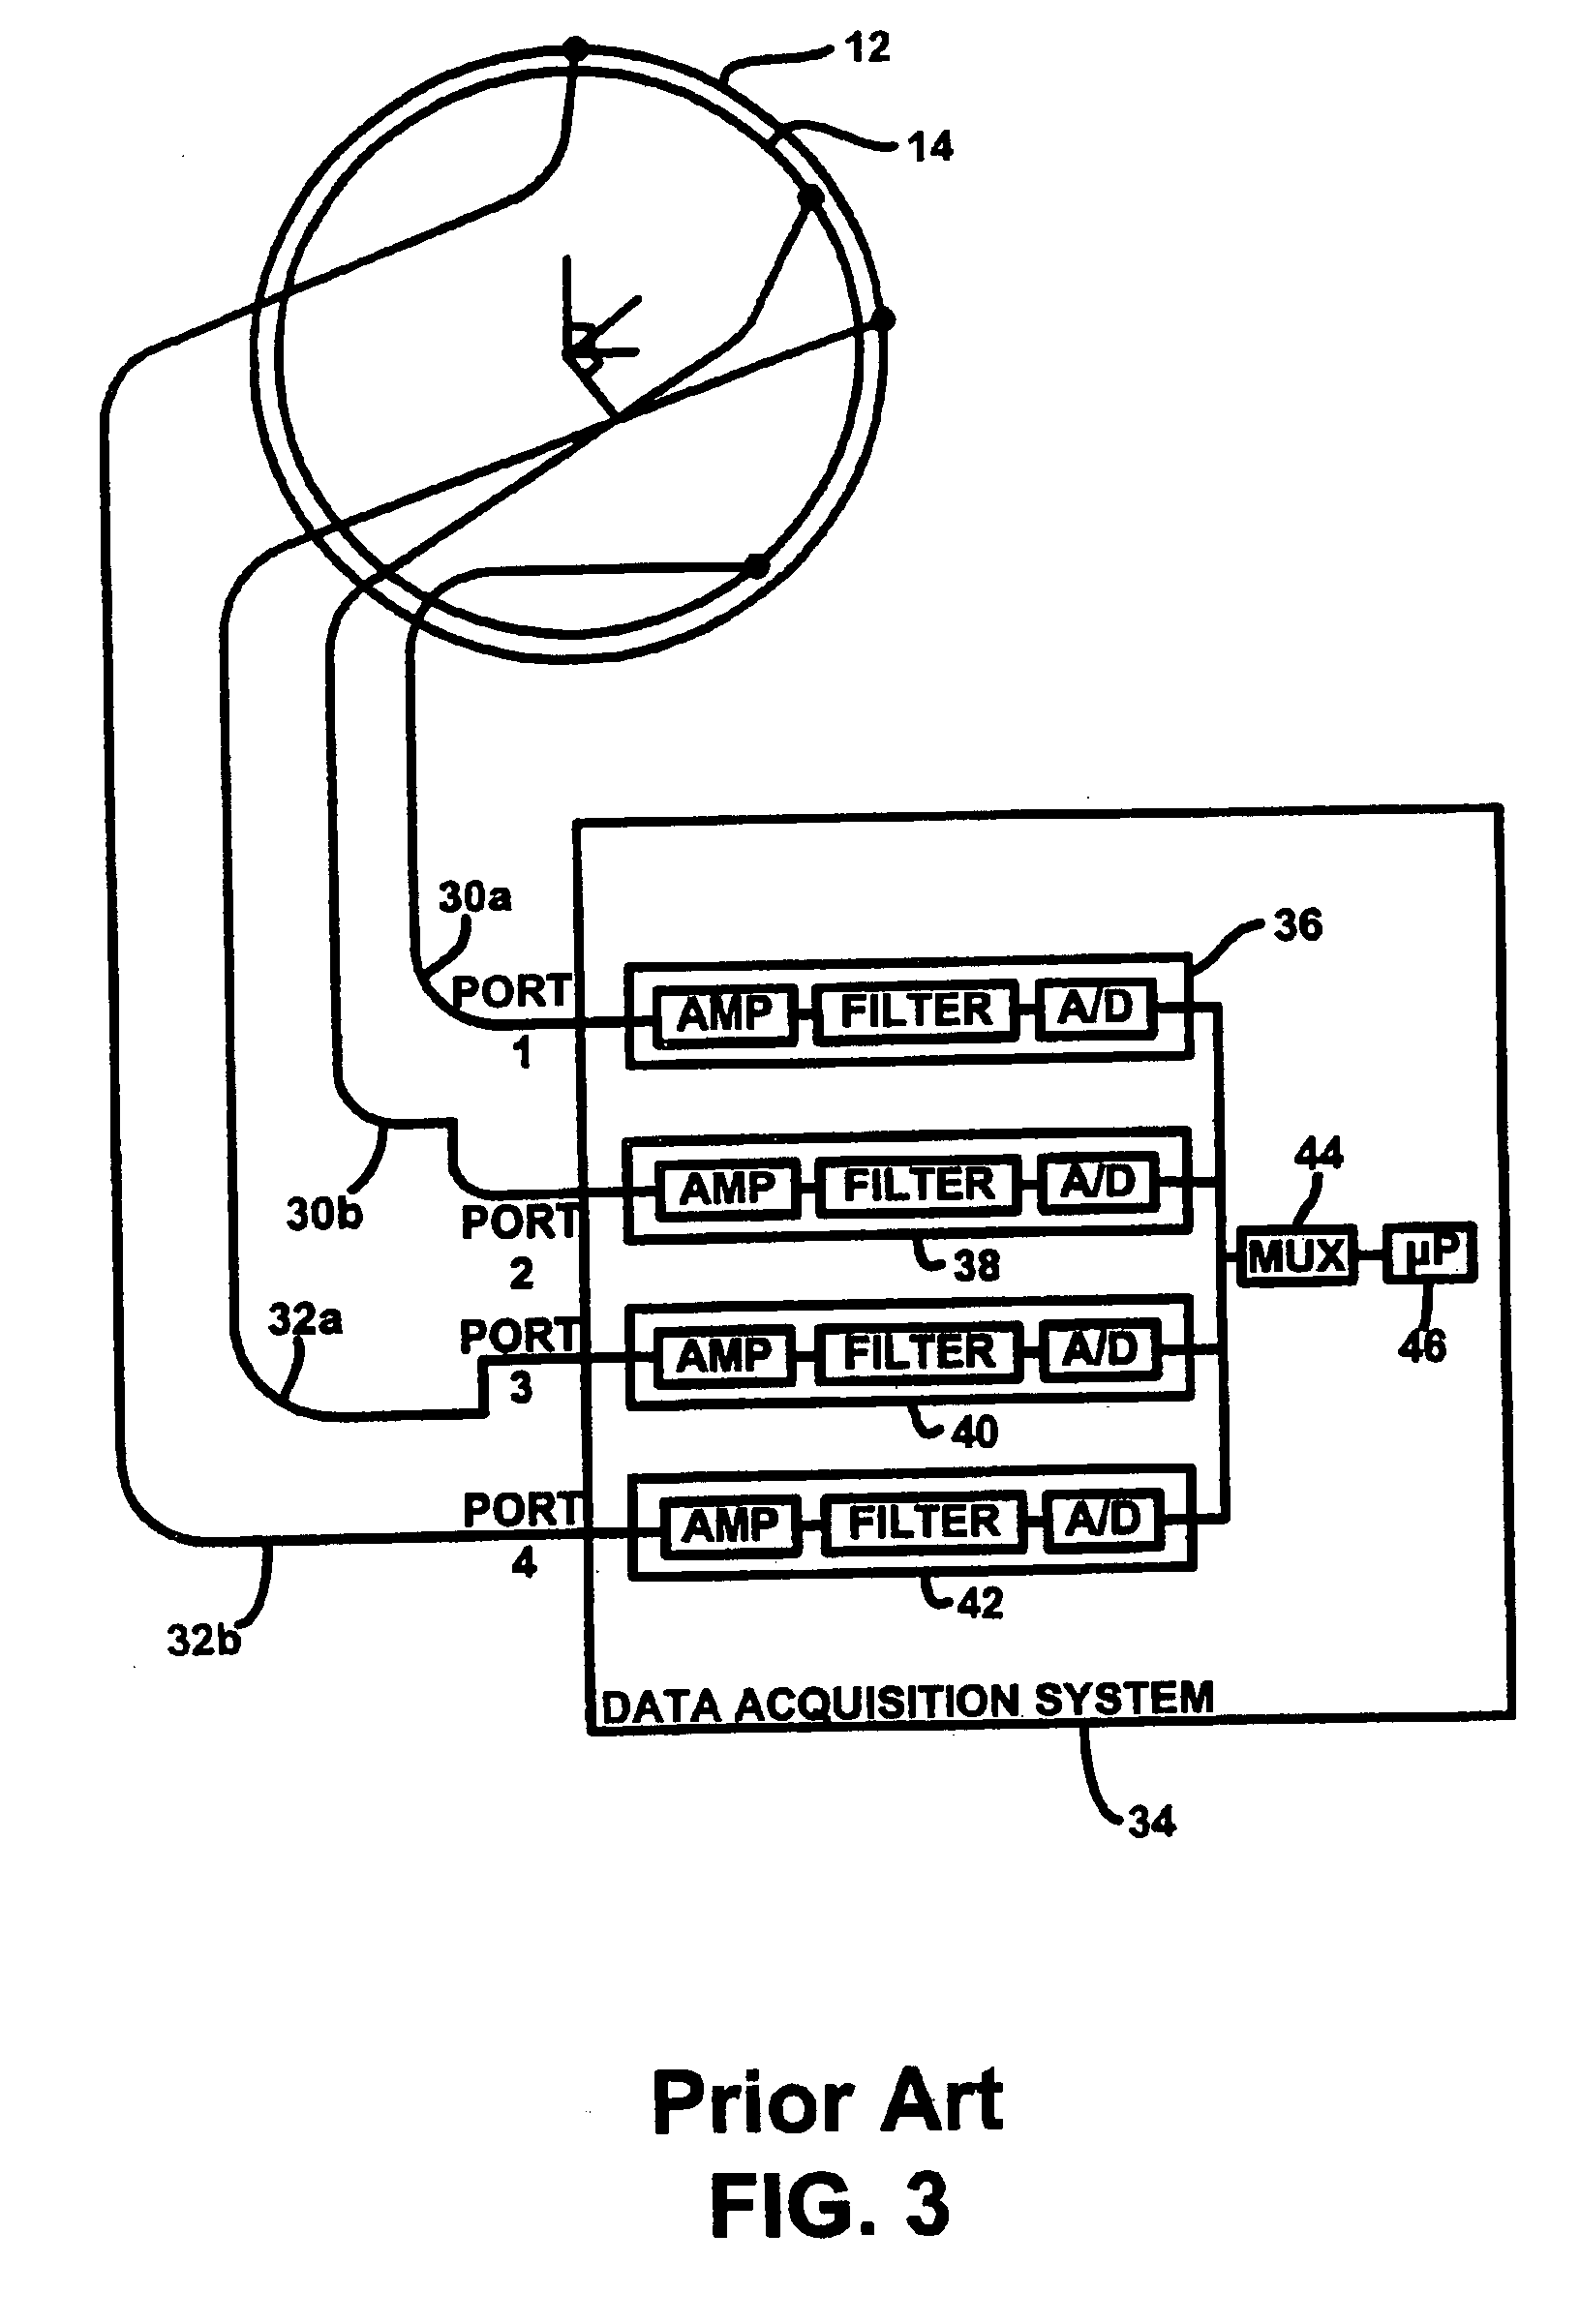 Transmit/receive phased array coil system